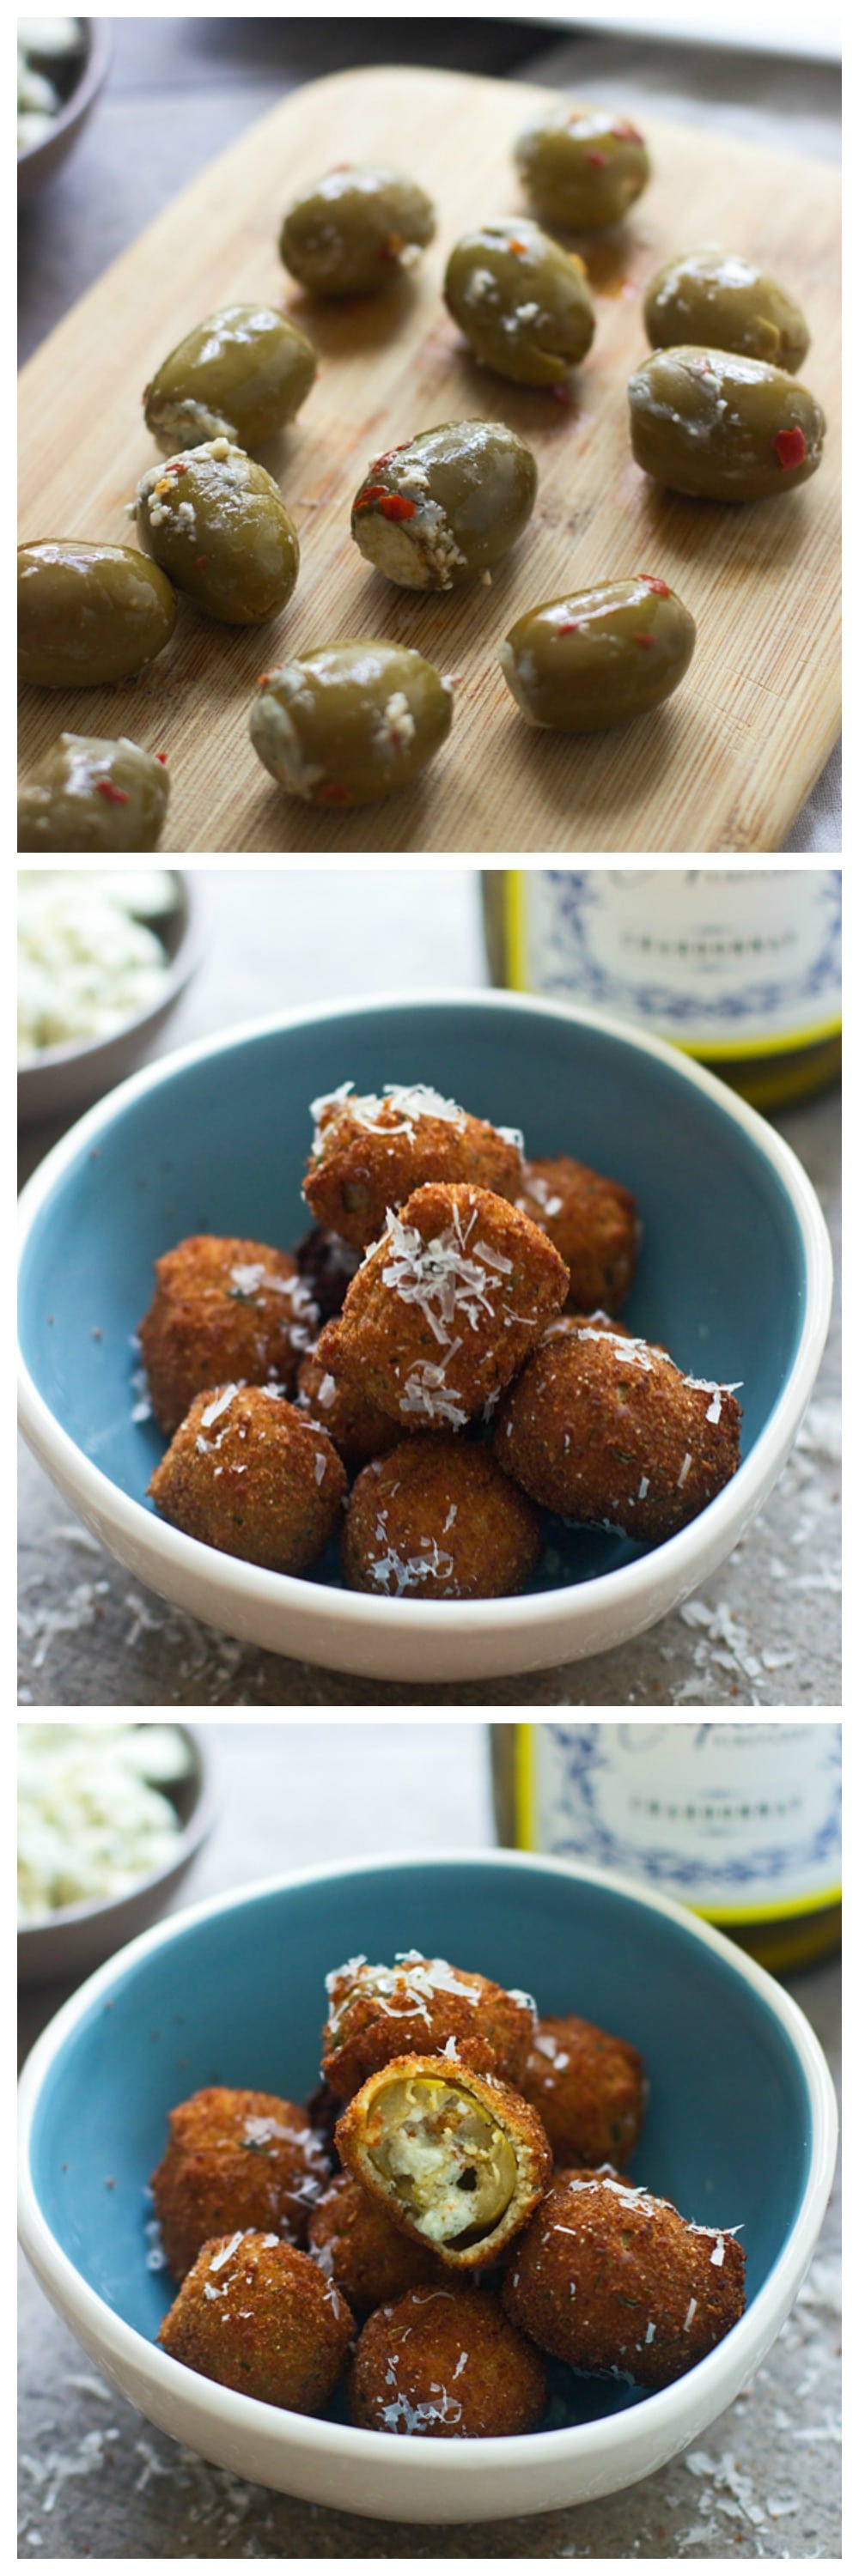 Fried Blue Cheese Stuffed Olives (Super easy!)